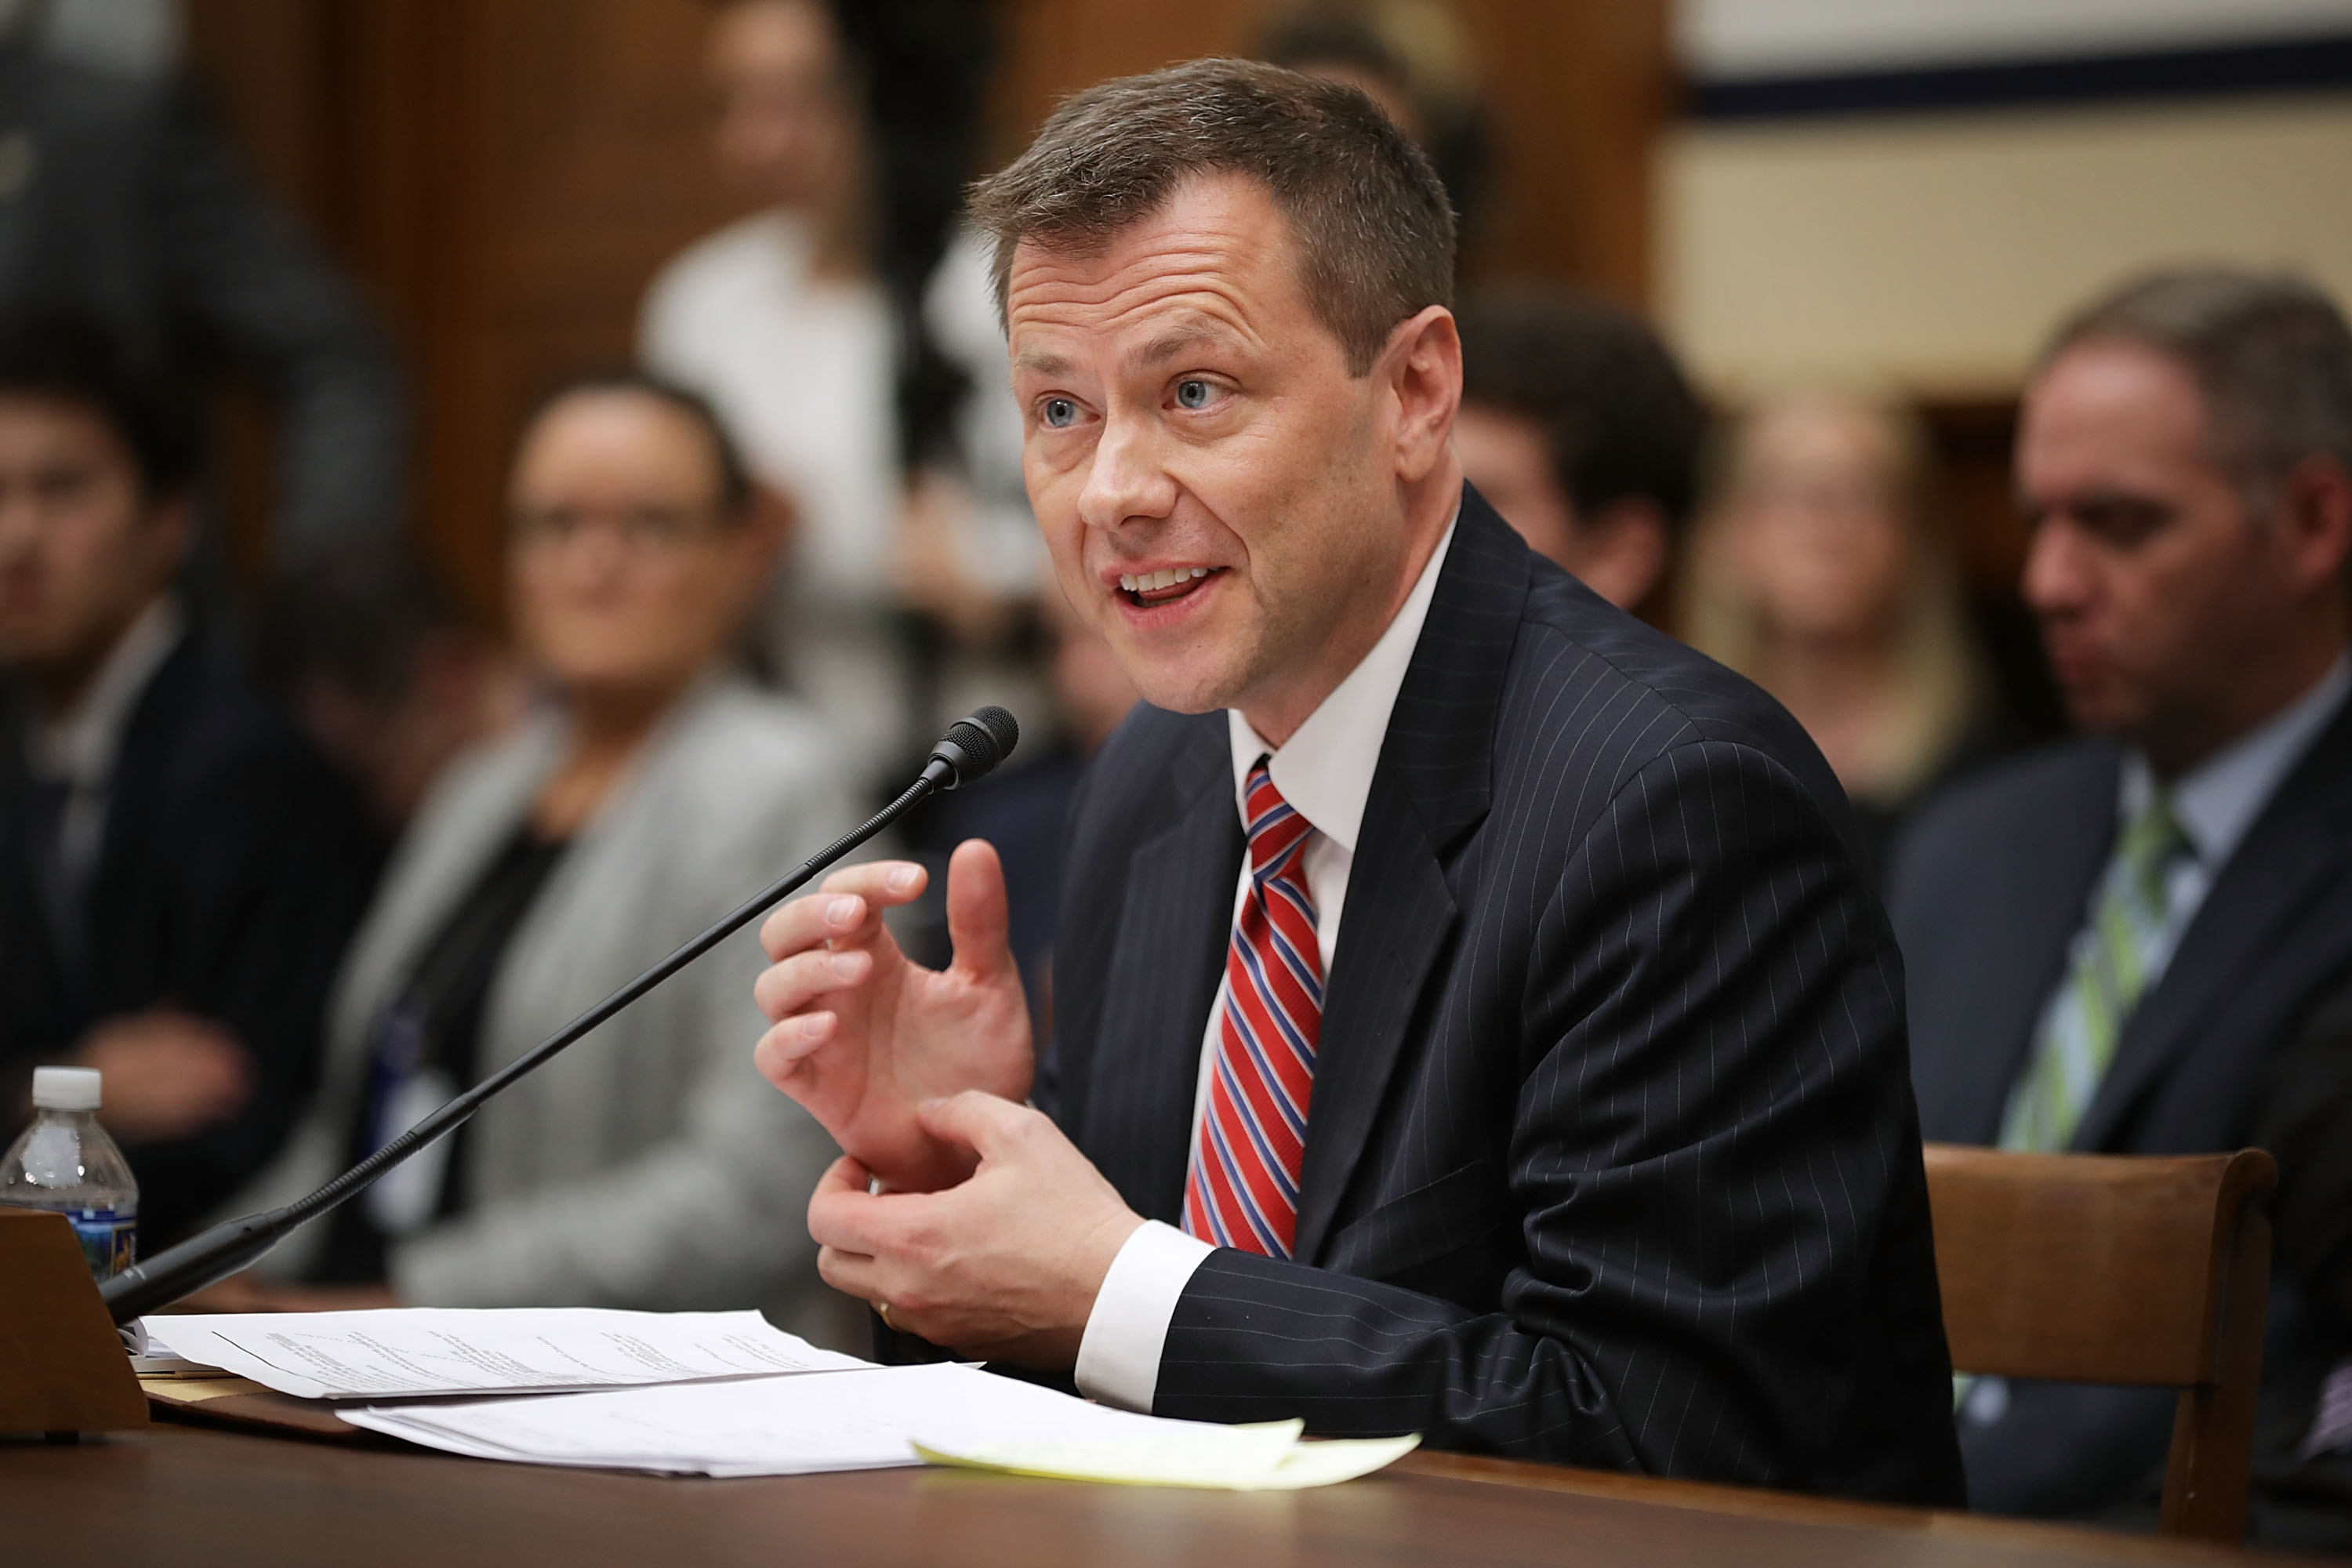 Deputy Assistant FBI Director Peter Strzok testifies before a joint committee hearing of the House Judiciary and Oversight and Government Reform committees in the Rayburn House Office Building on Capitol Hill July 12, 2018 in Washington, DC. (Chip Somodevilla&mdash;Getty Images)